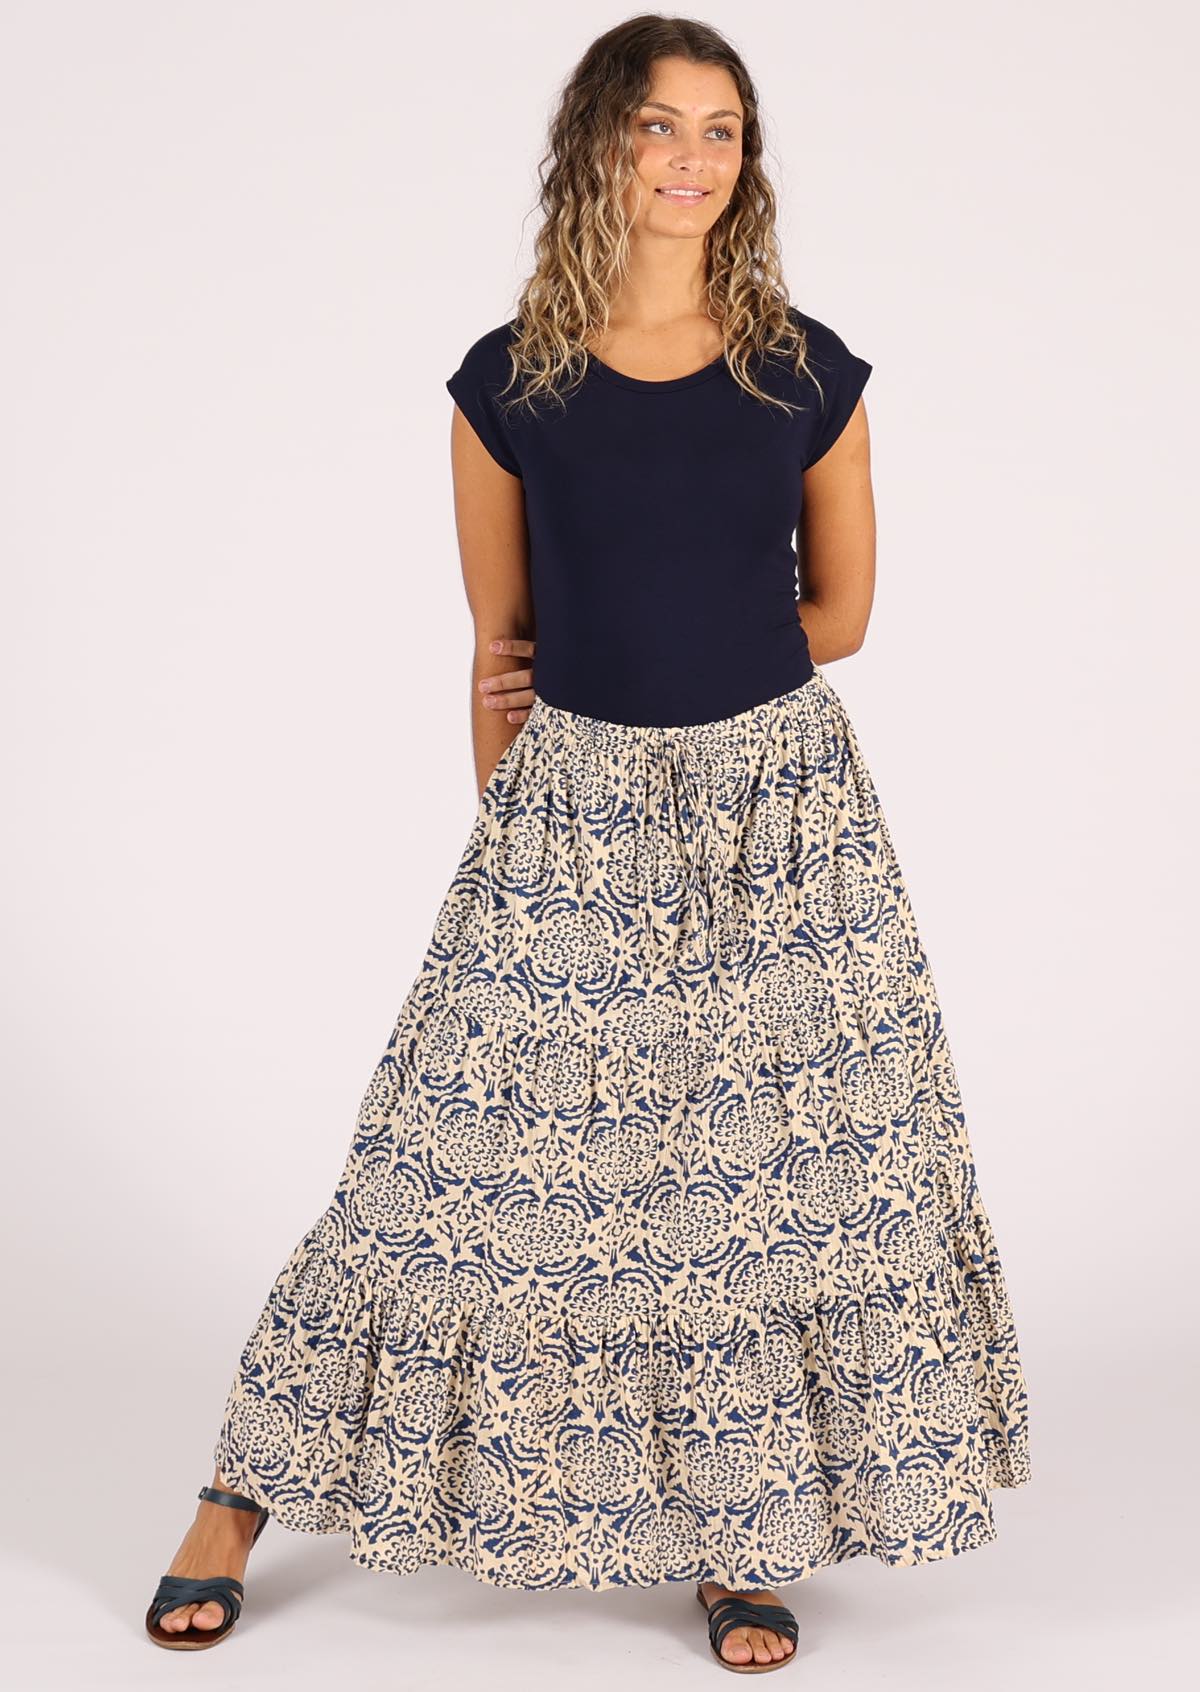 Cotton maxi skirt with elasticised waistband and drawstring